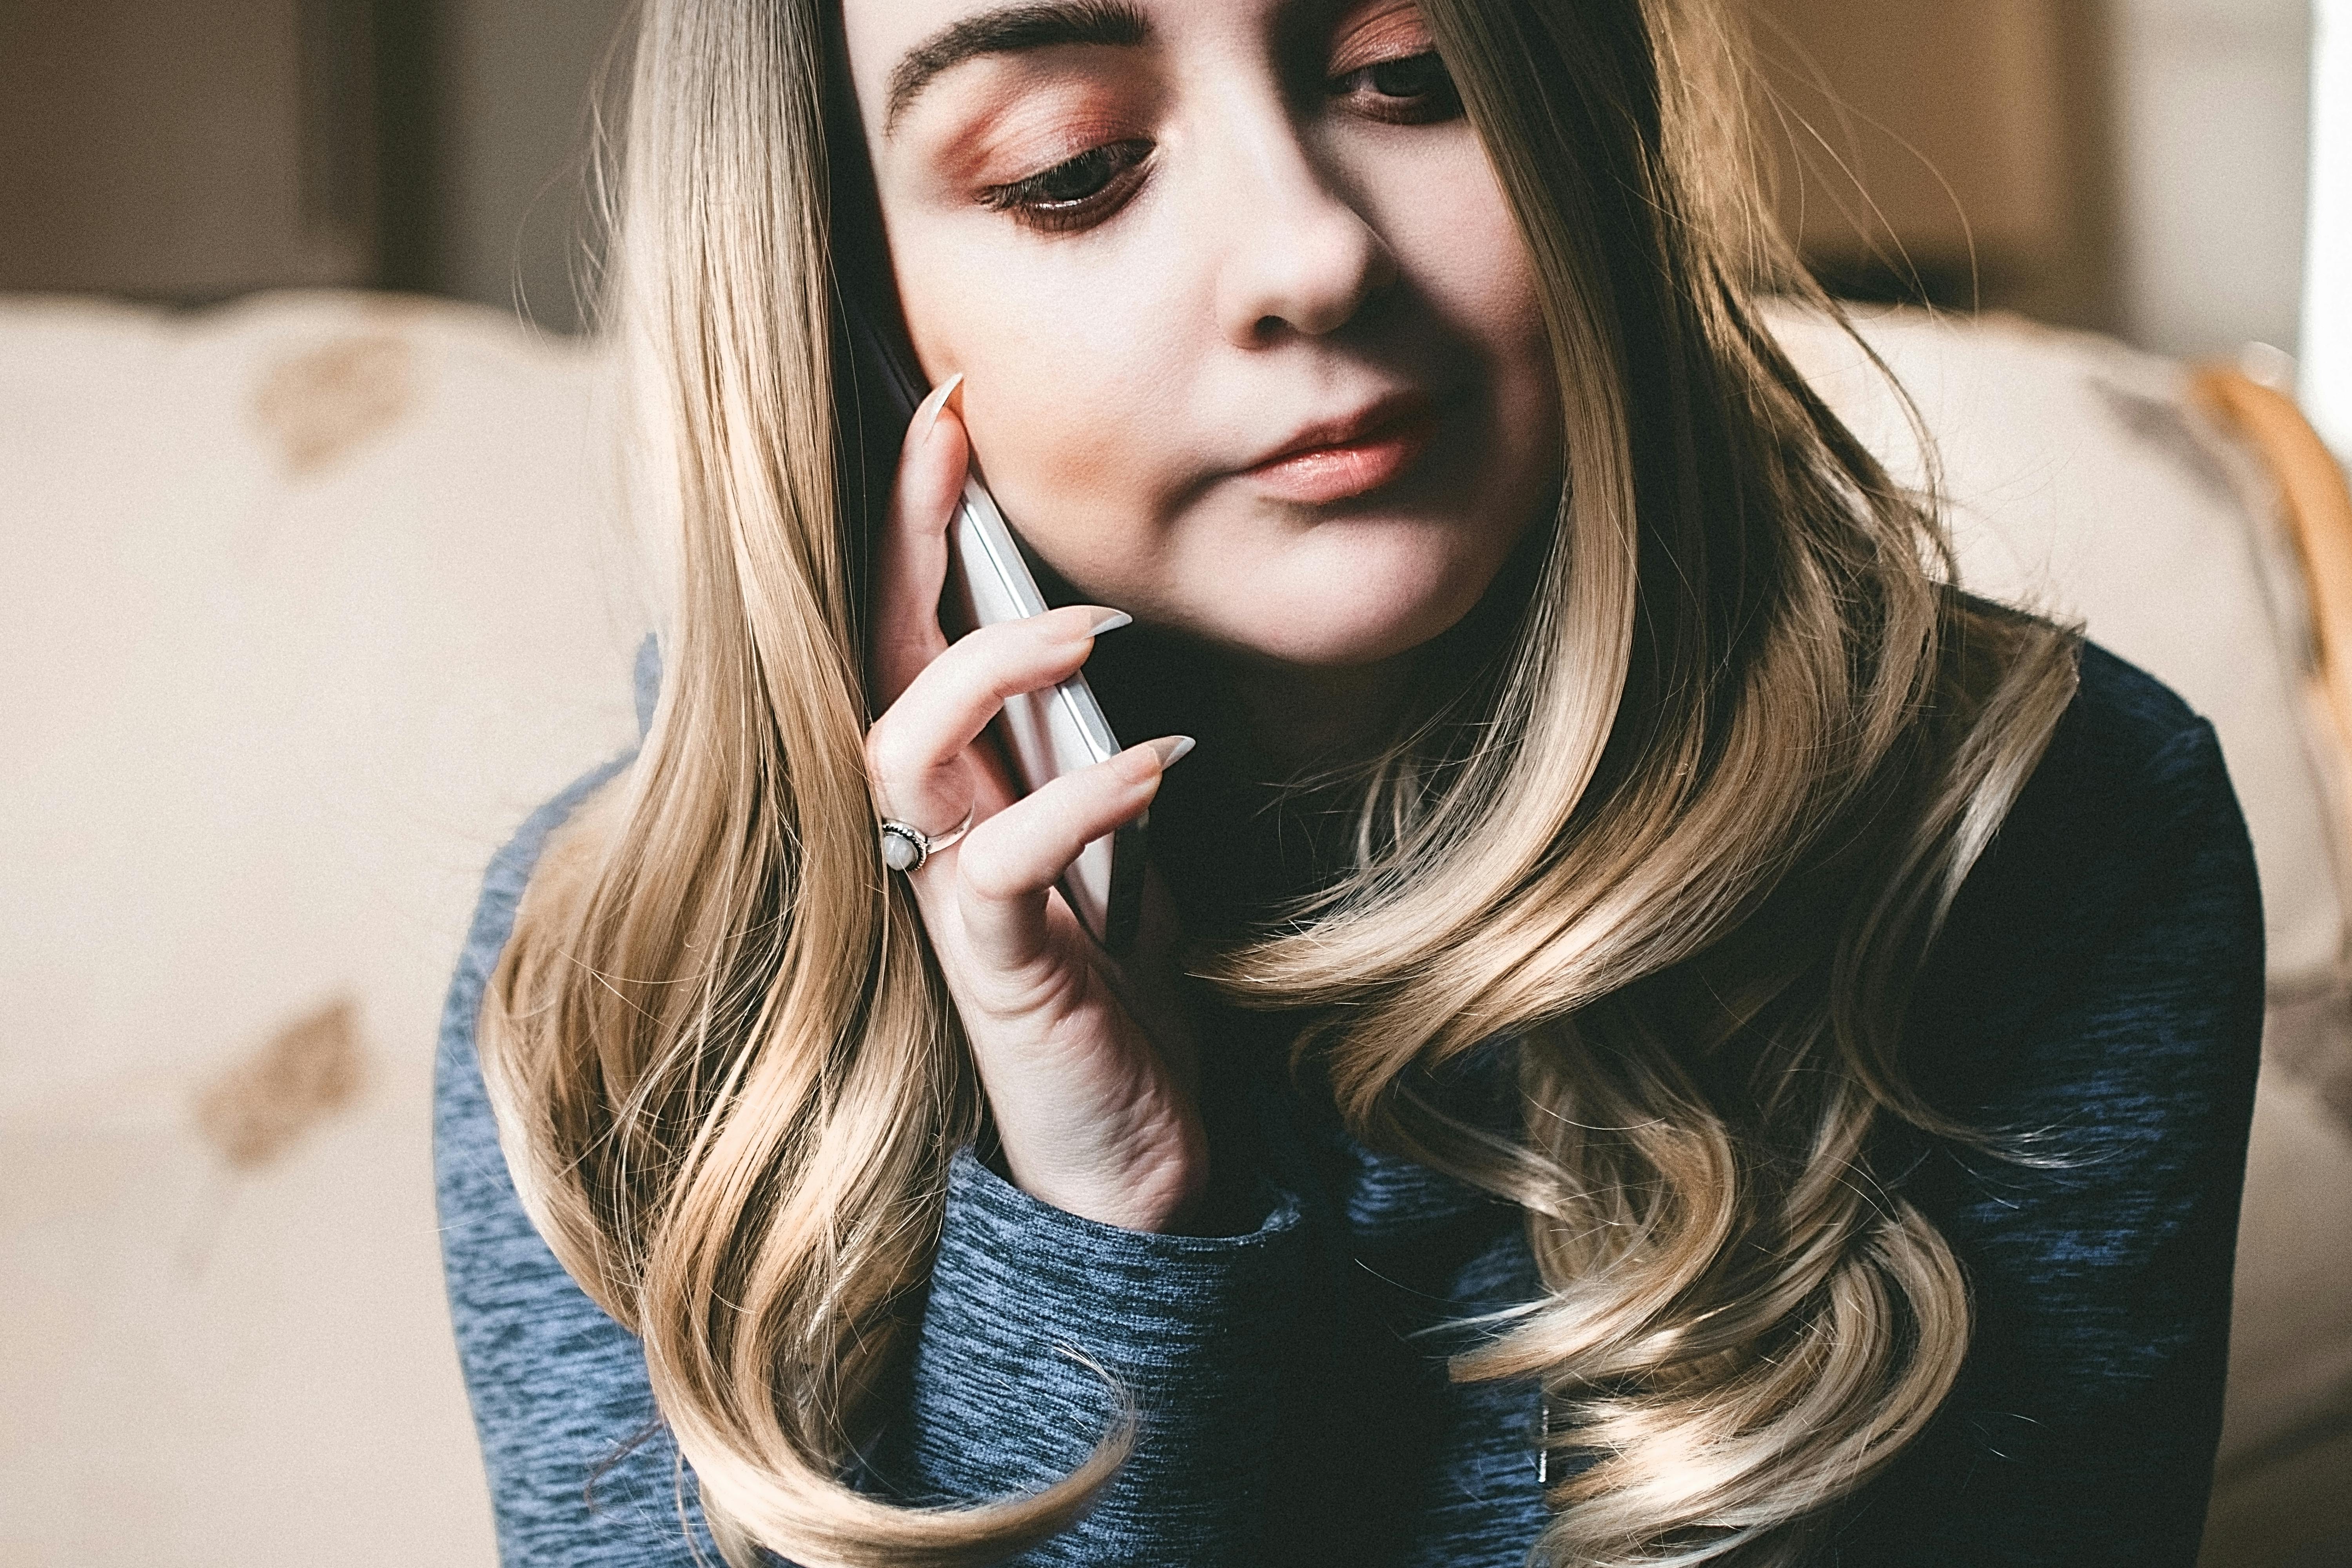 A young girl having a conversation on the phone | Source: Pexels